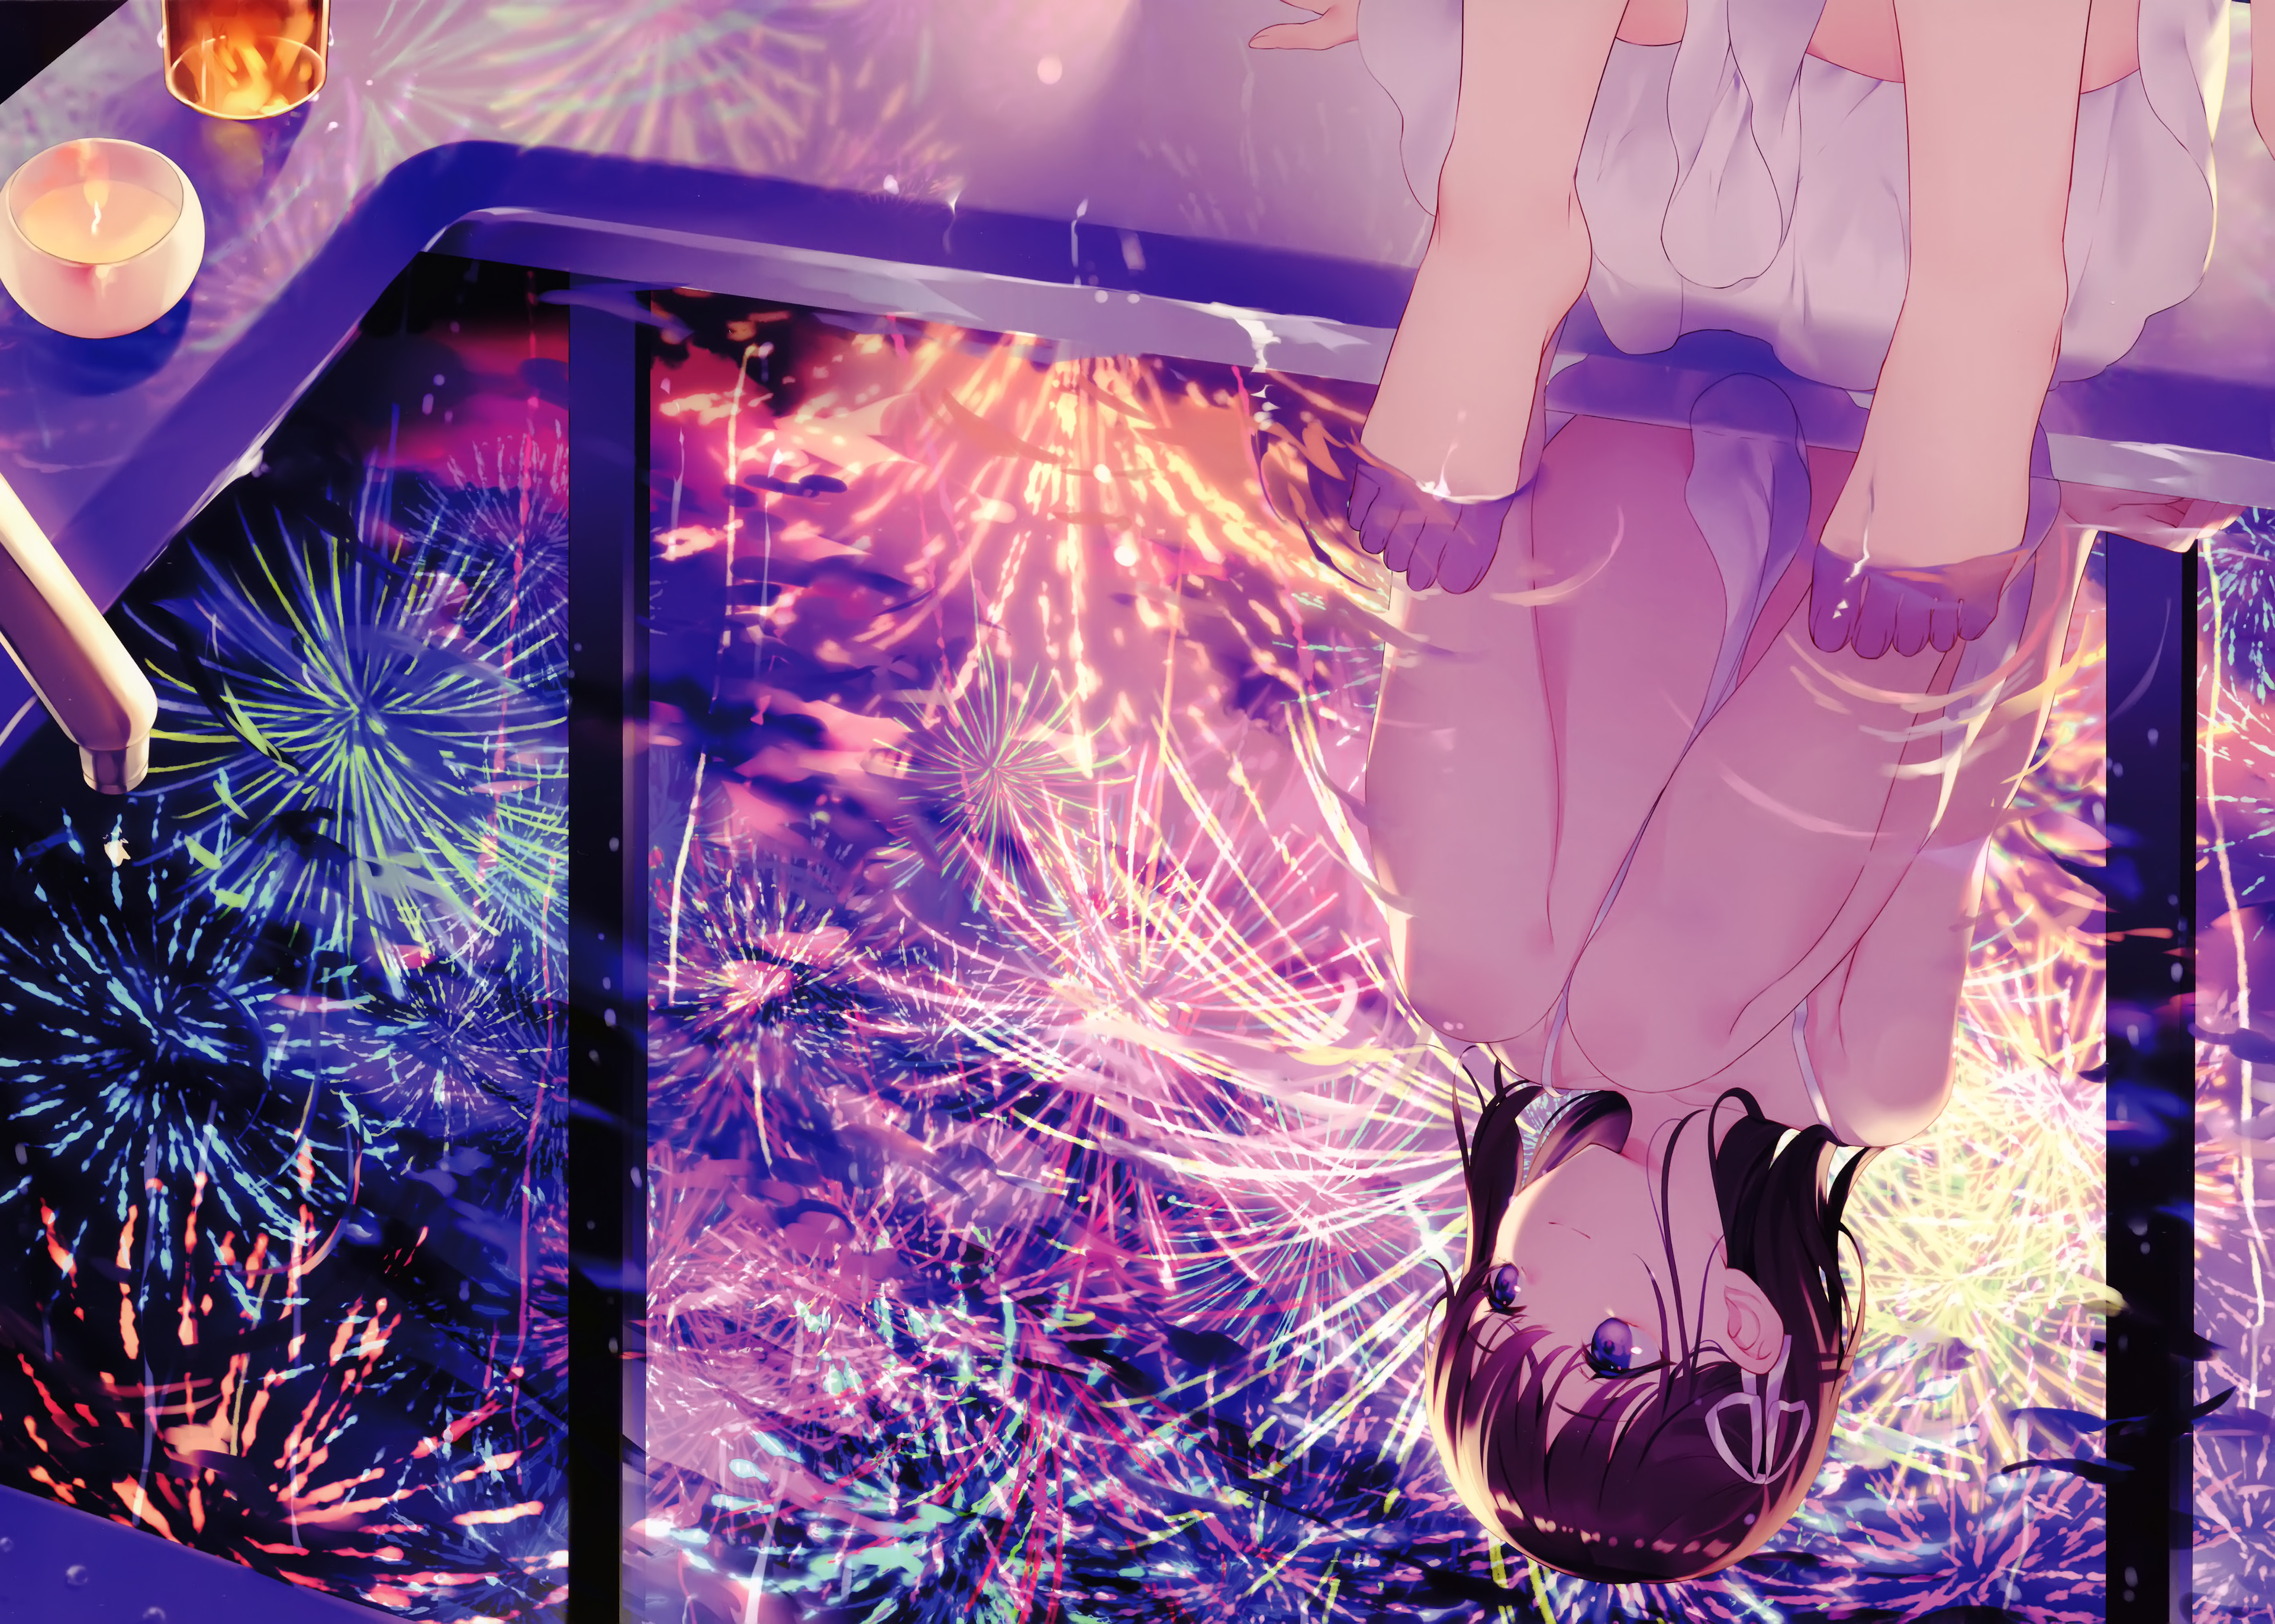 Anime Anime Girls Purple Eyes Brunette Ribbons Candles Fireworks Water Mirrored Sitting Legs Looking 5636x4024